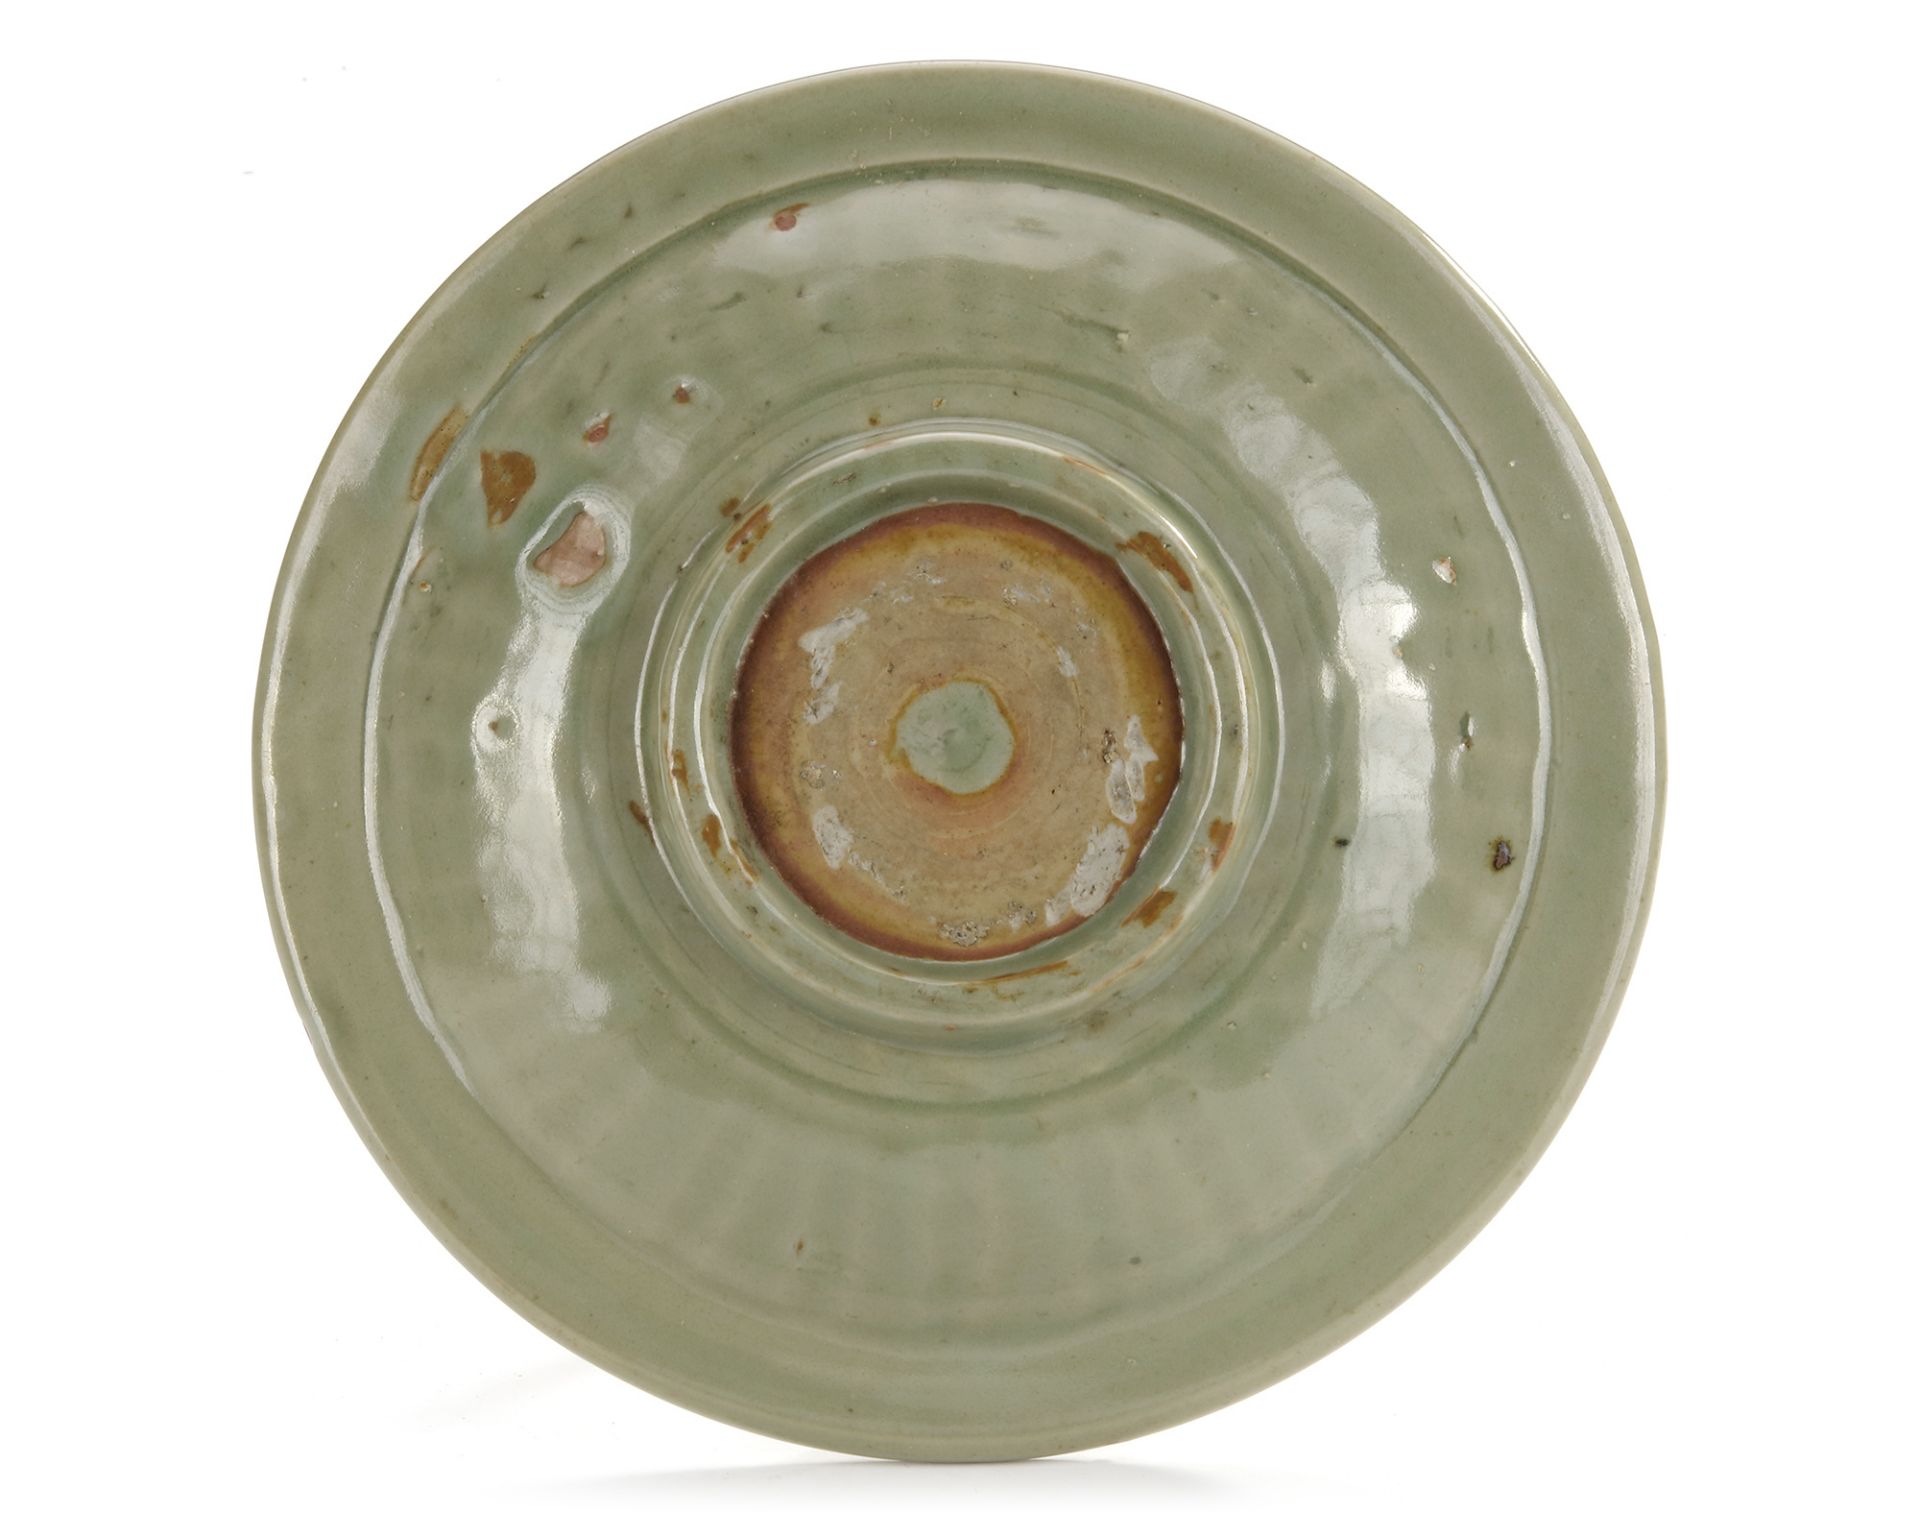 A CHINESE LONGQUAN DISH, MING DYNASTY (1368-1644) - Image 2 of 3